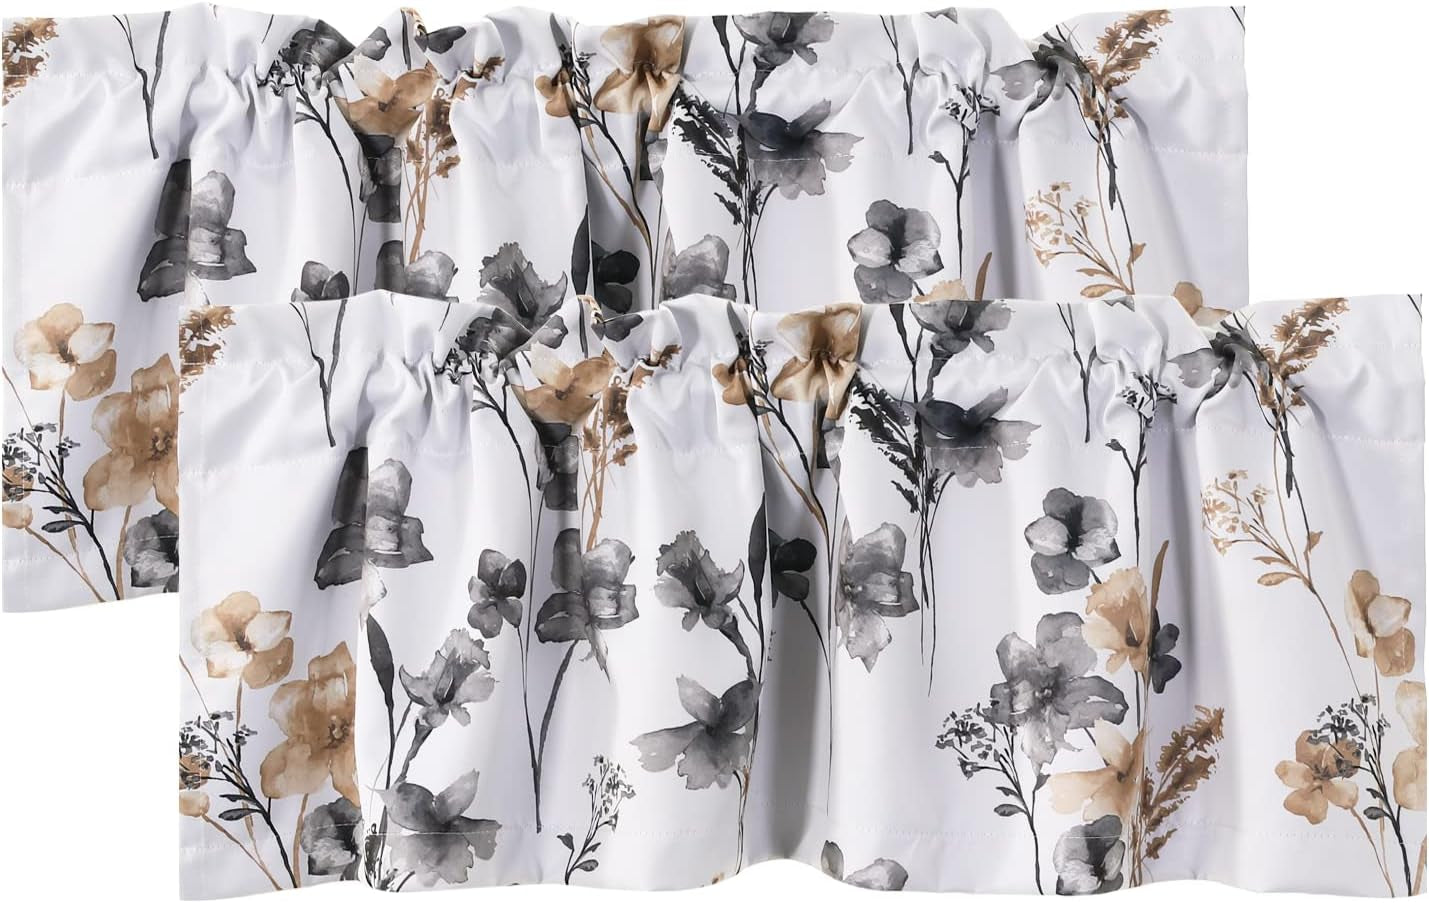 H.VERSAILTEX 100% Blackout Curtains for Bedroom Cattleya Floral Printed Drapes 84 Inches Long Leah Floral Pattern Full Light Blocking Drapes with Black Liner Rod Pocket 2 Panels, Navy/Taupe  H.VERSAILTEX Grey/Taupe 52"W X 18"L 